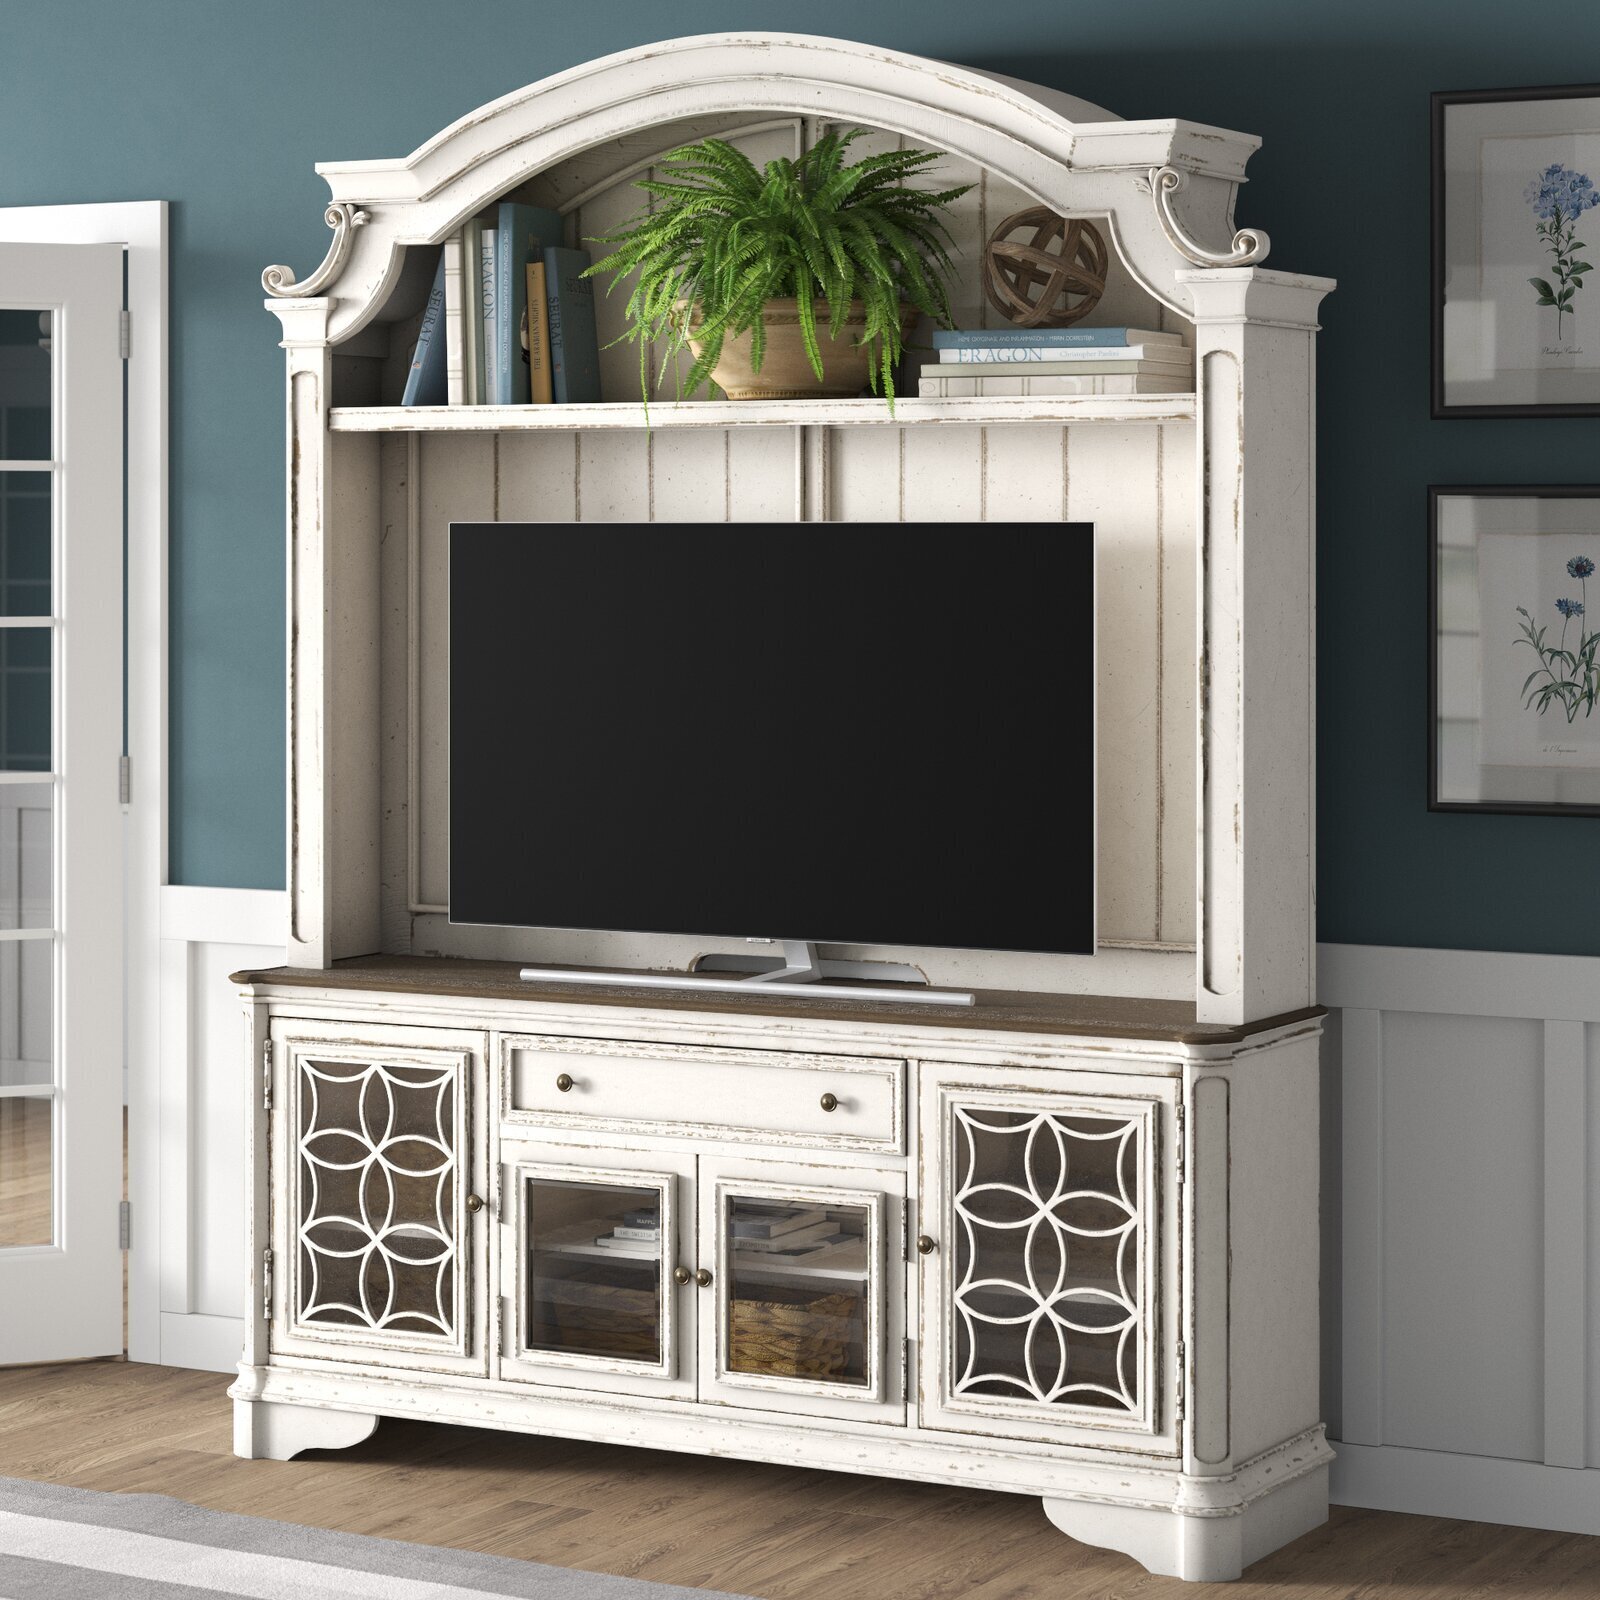 Living Room furniture set GREY White entertainment unit tv stand New sideboard 